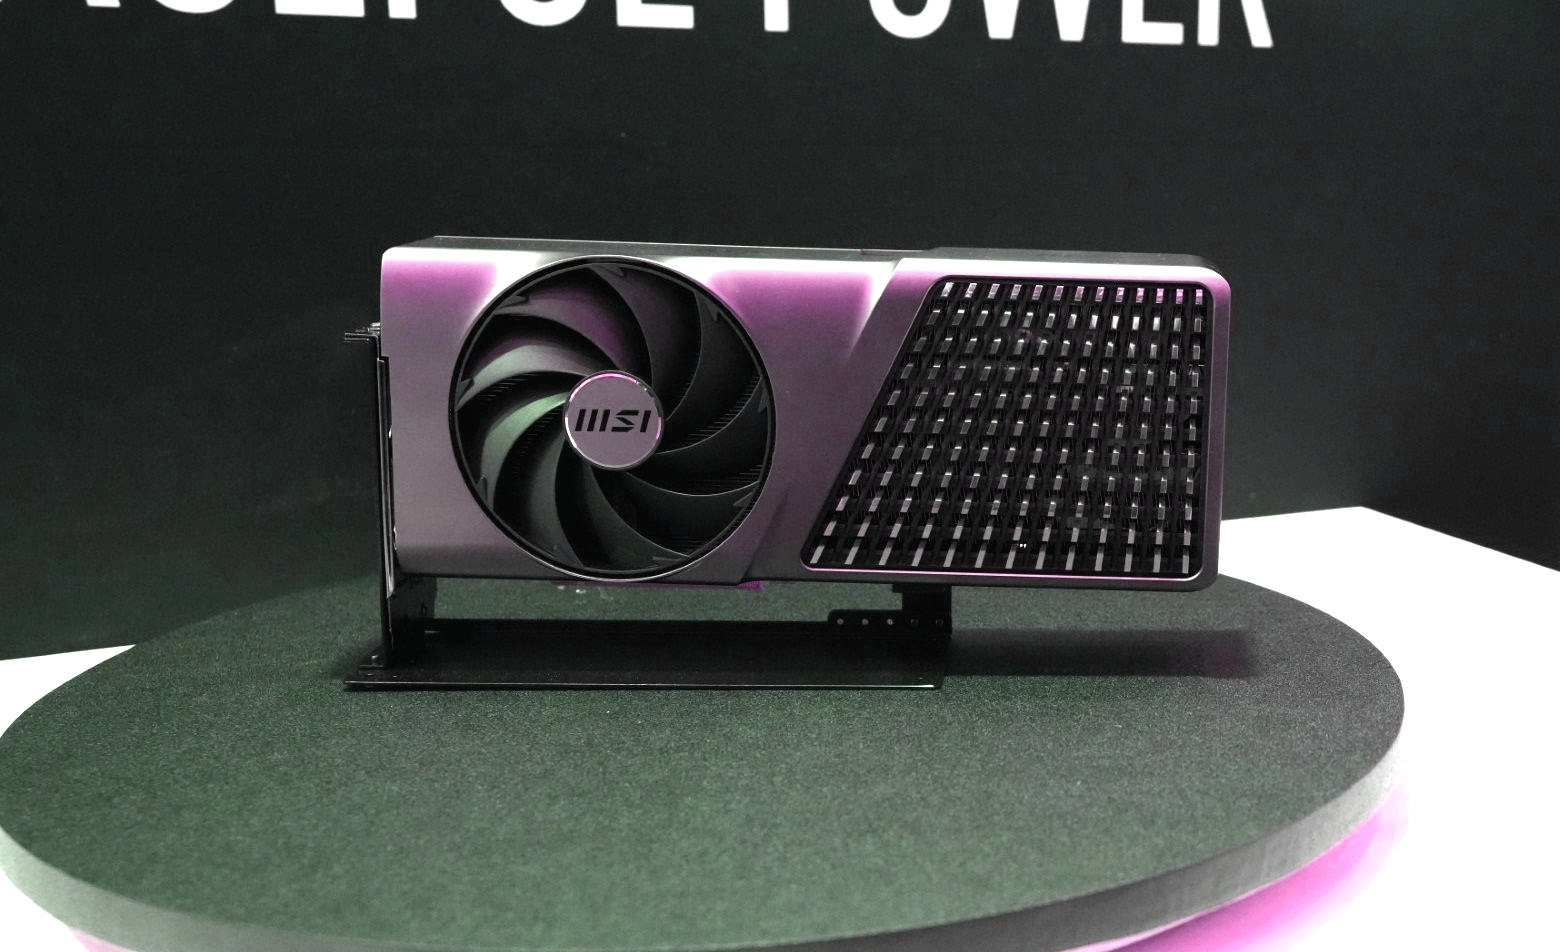 I’m in love with MSI’s EXPERT GPUs